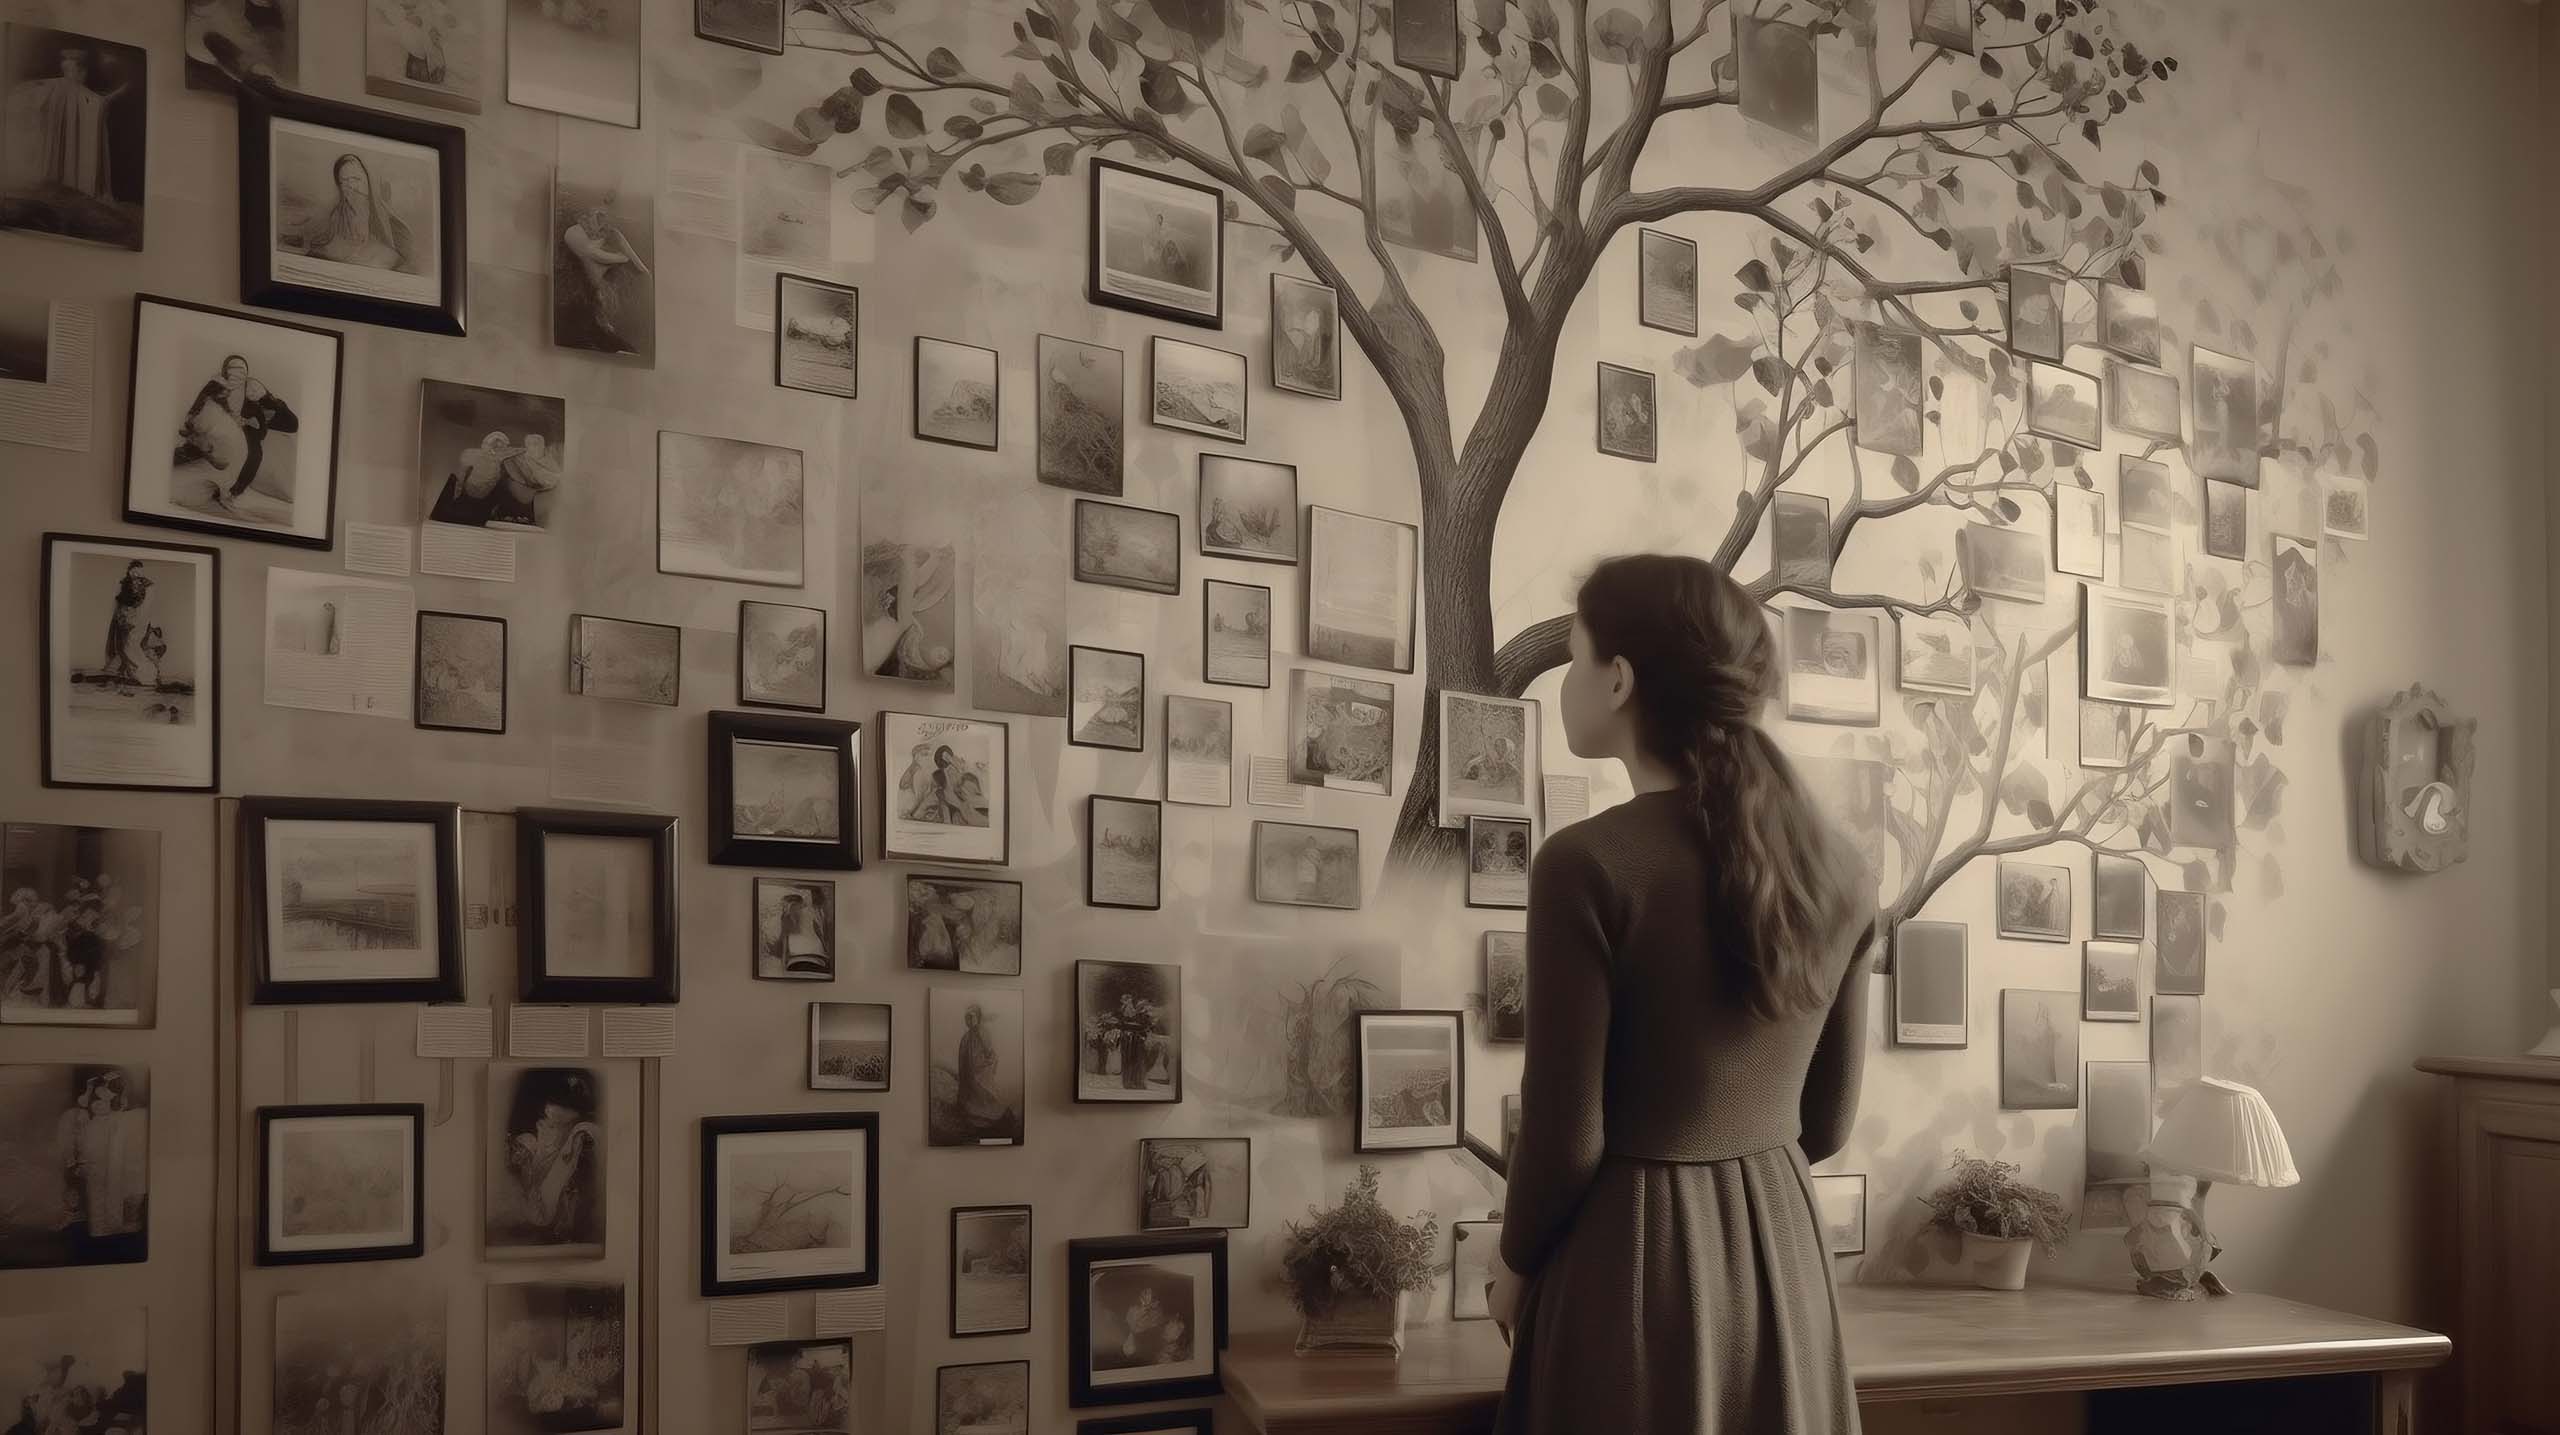 photos on a wall in the shape of a family tree